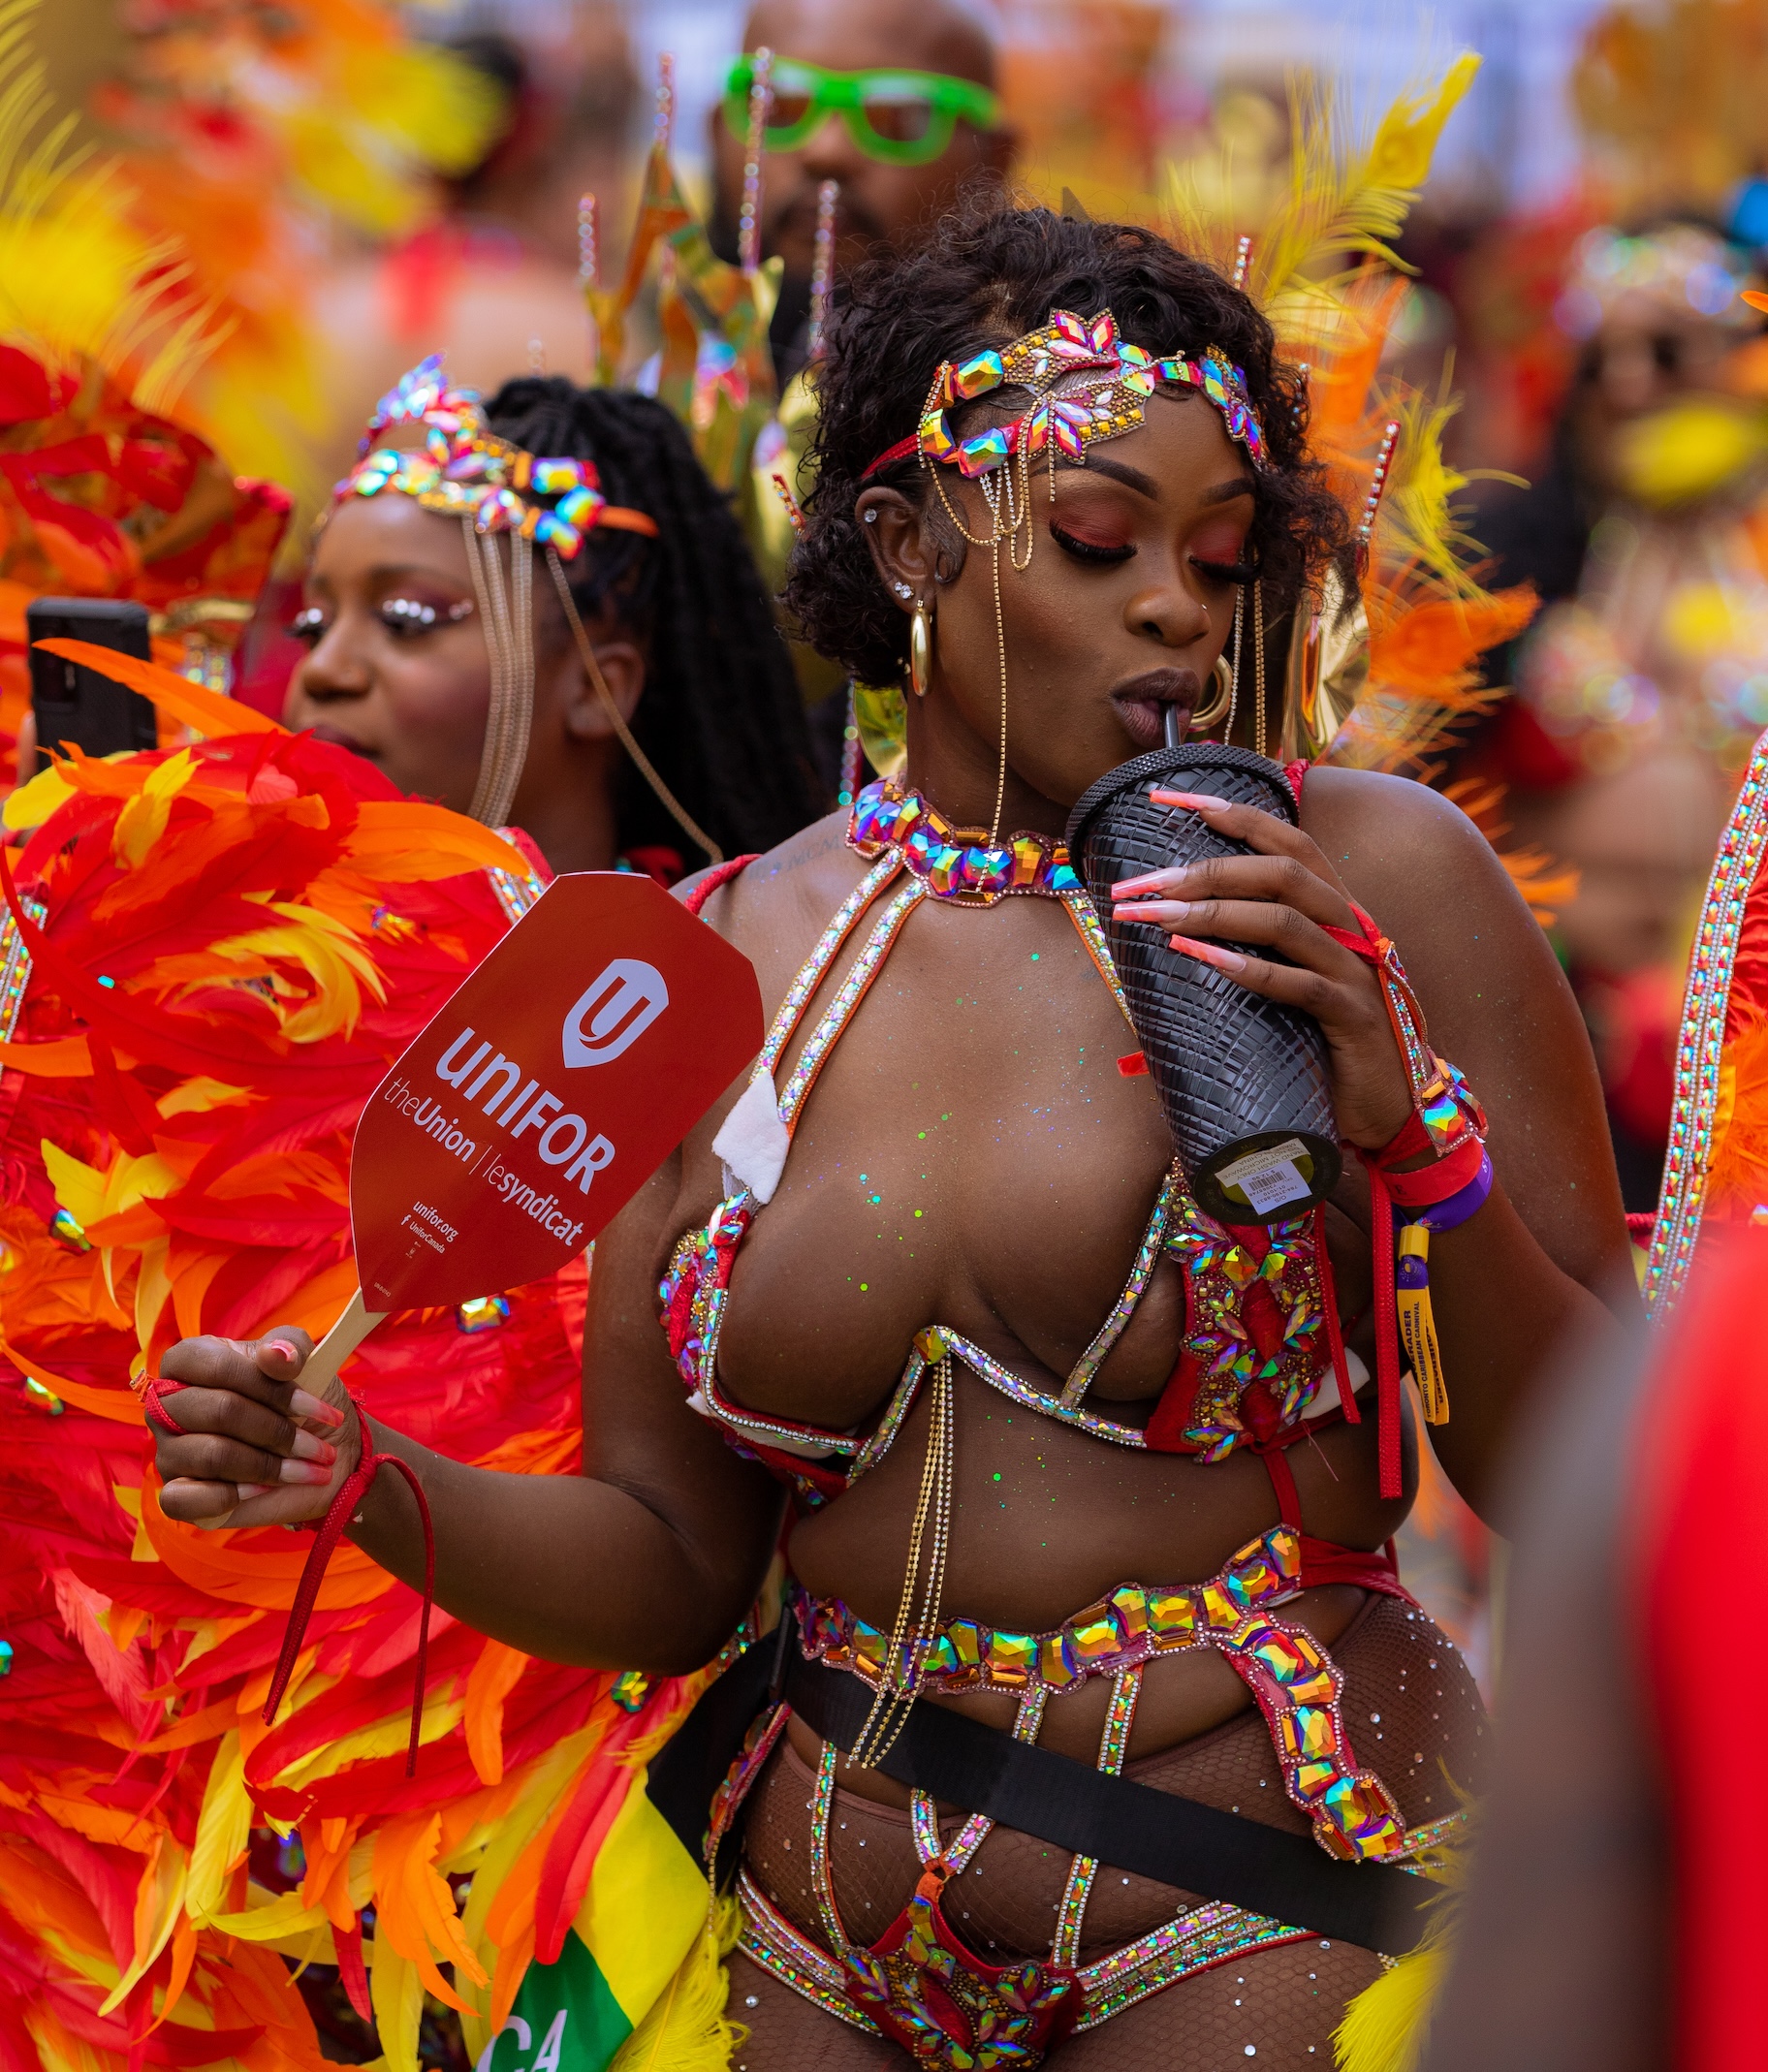 Toronto Carnival sponsorship opportunity for brands. Reach the black caribbean community with Sunlime Mas.